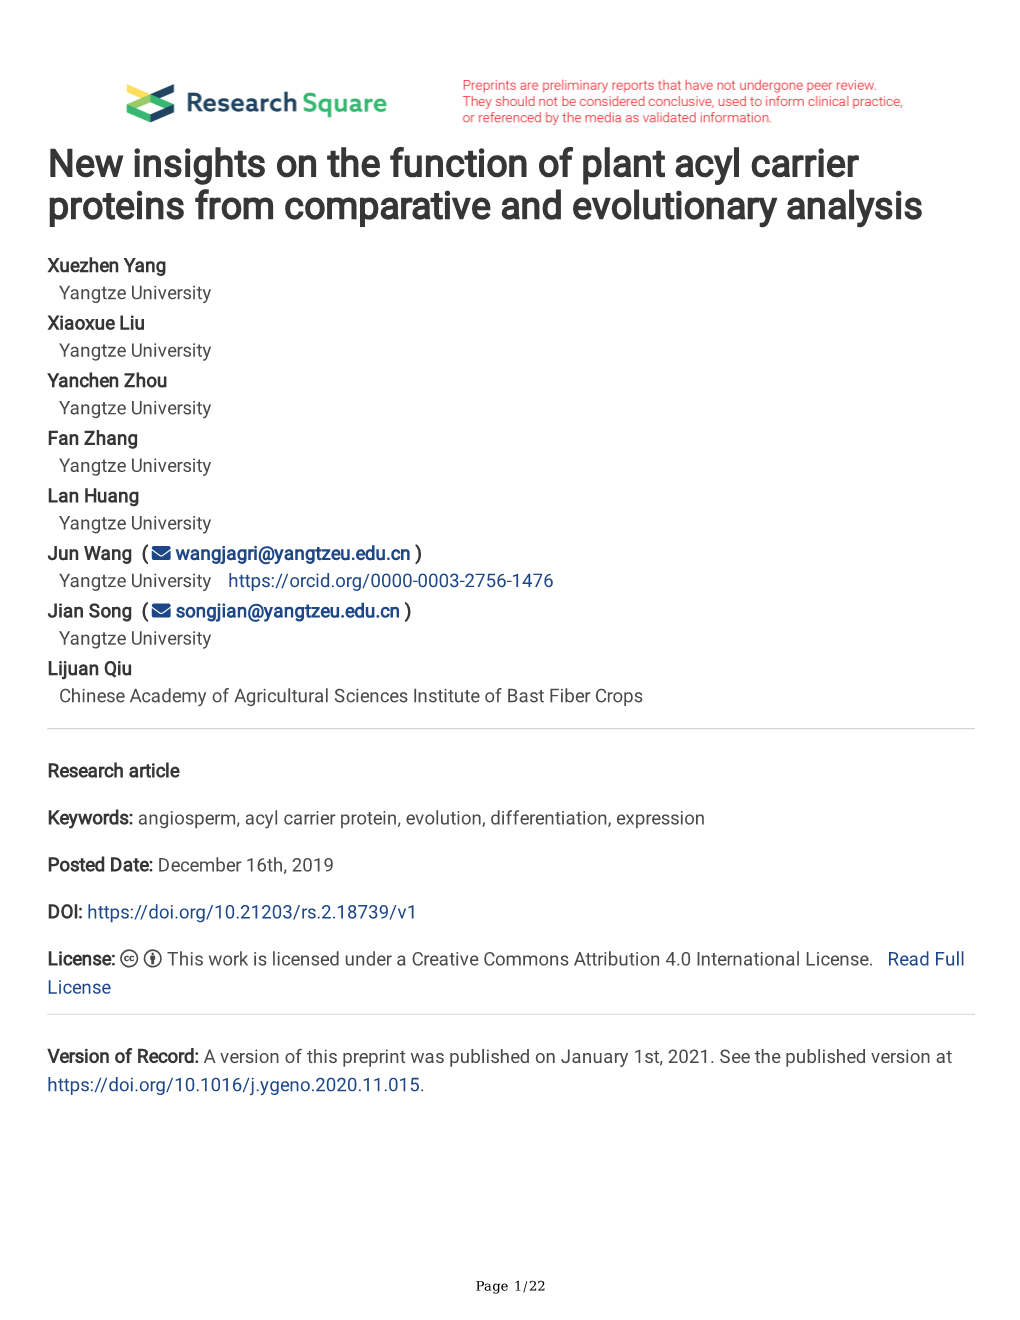 New Insights on the Function of Plant Acyl Carrier Proteins from Comparative and Evolutionary Analysis